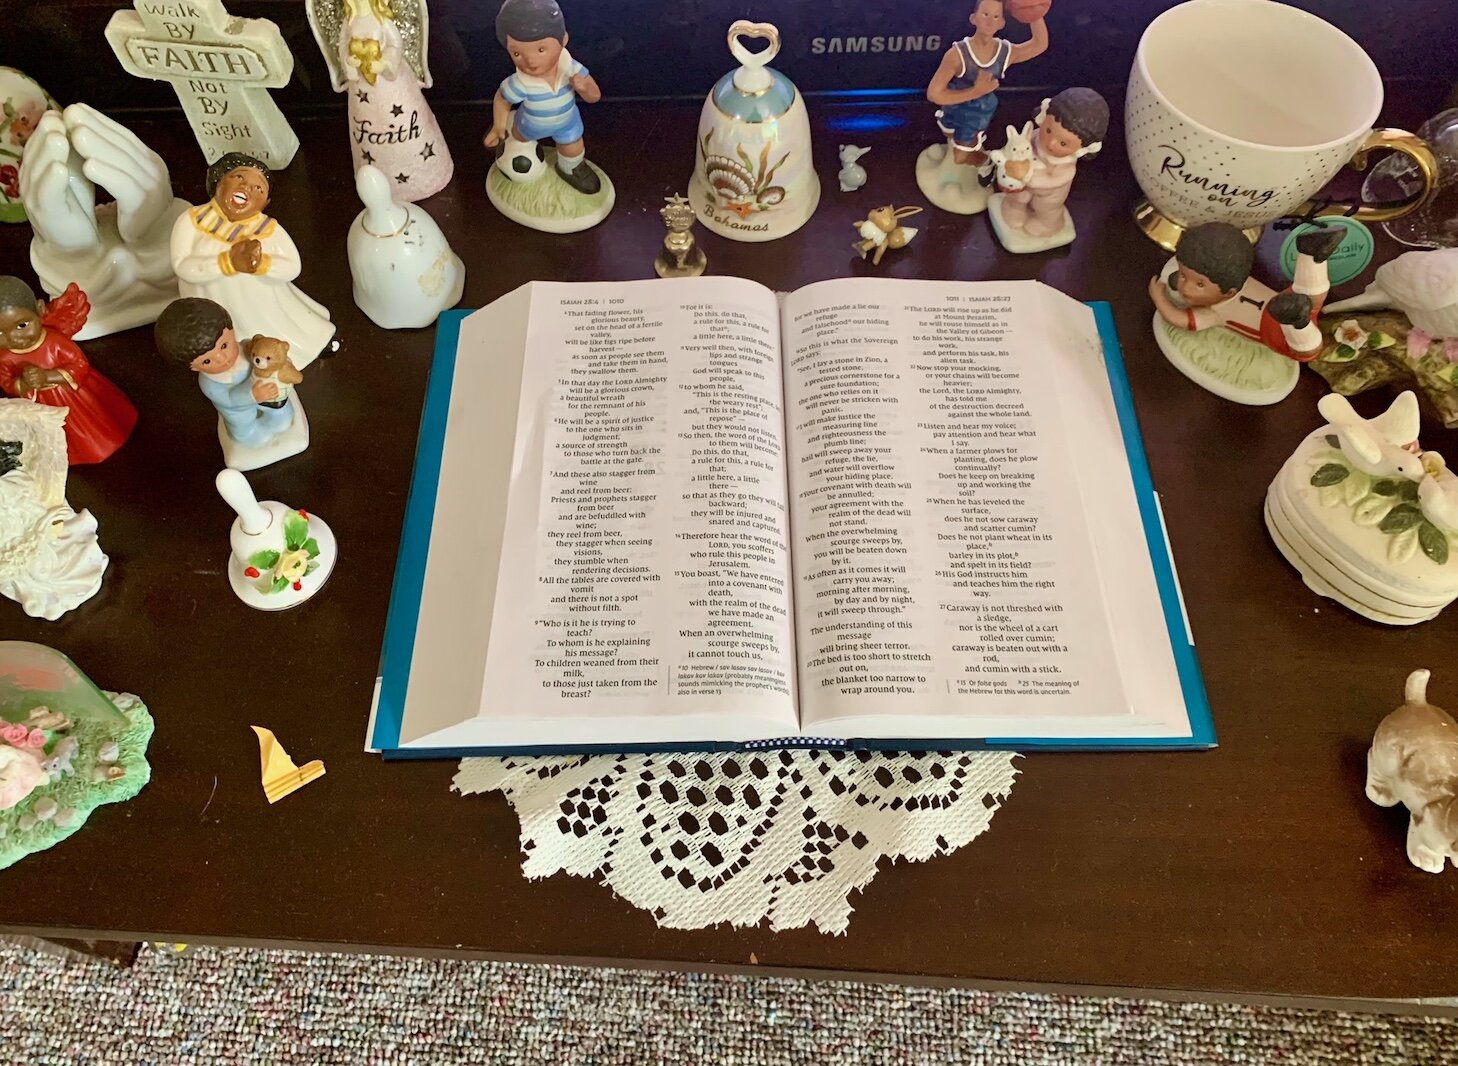 Tiny porcelain figurines surround a Bible that Katherine White has used to pray for her family. She says the young children in her family never disturbed the figurines.